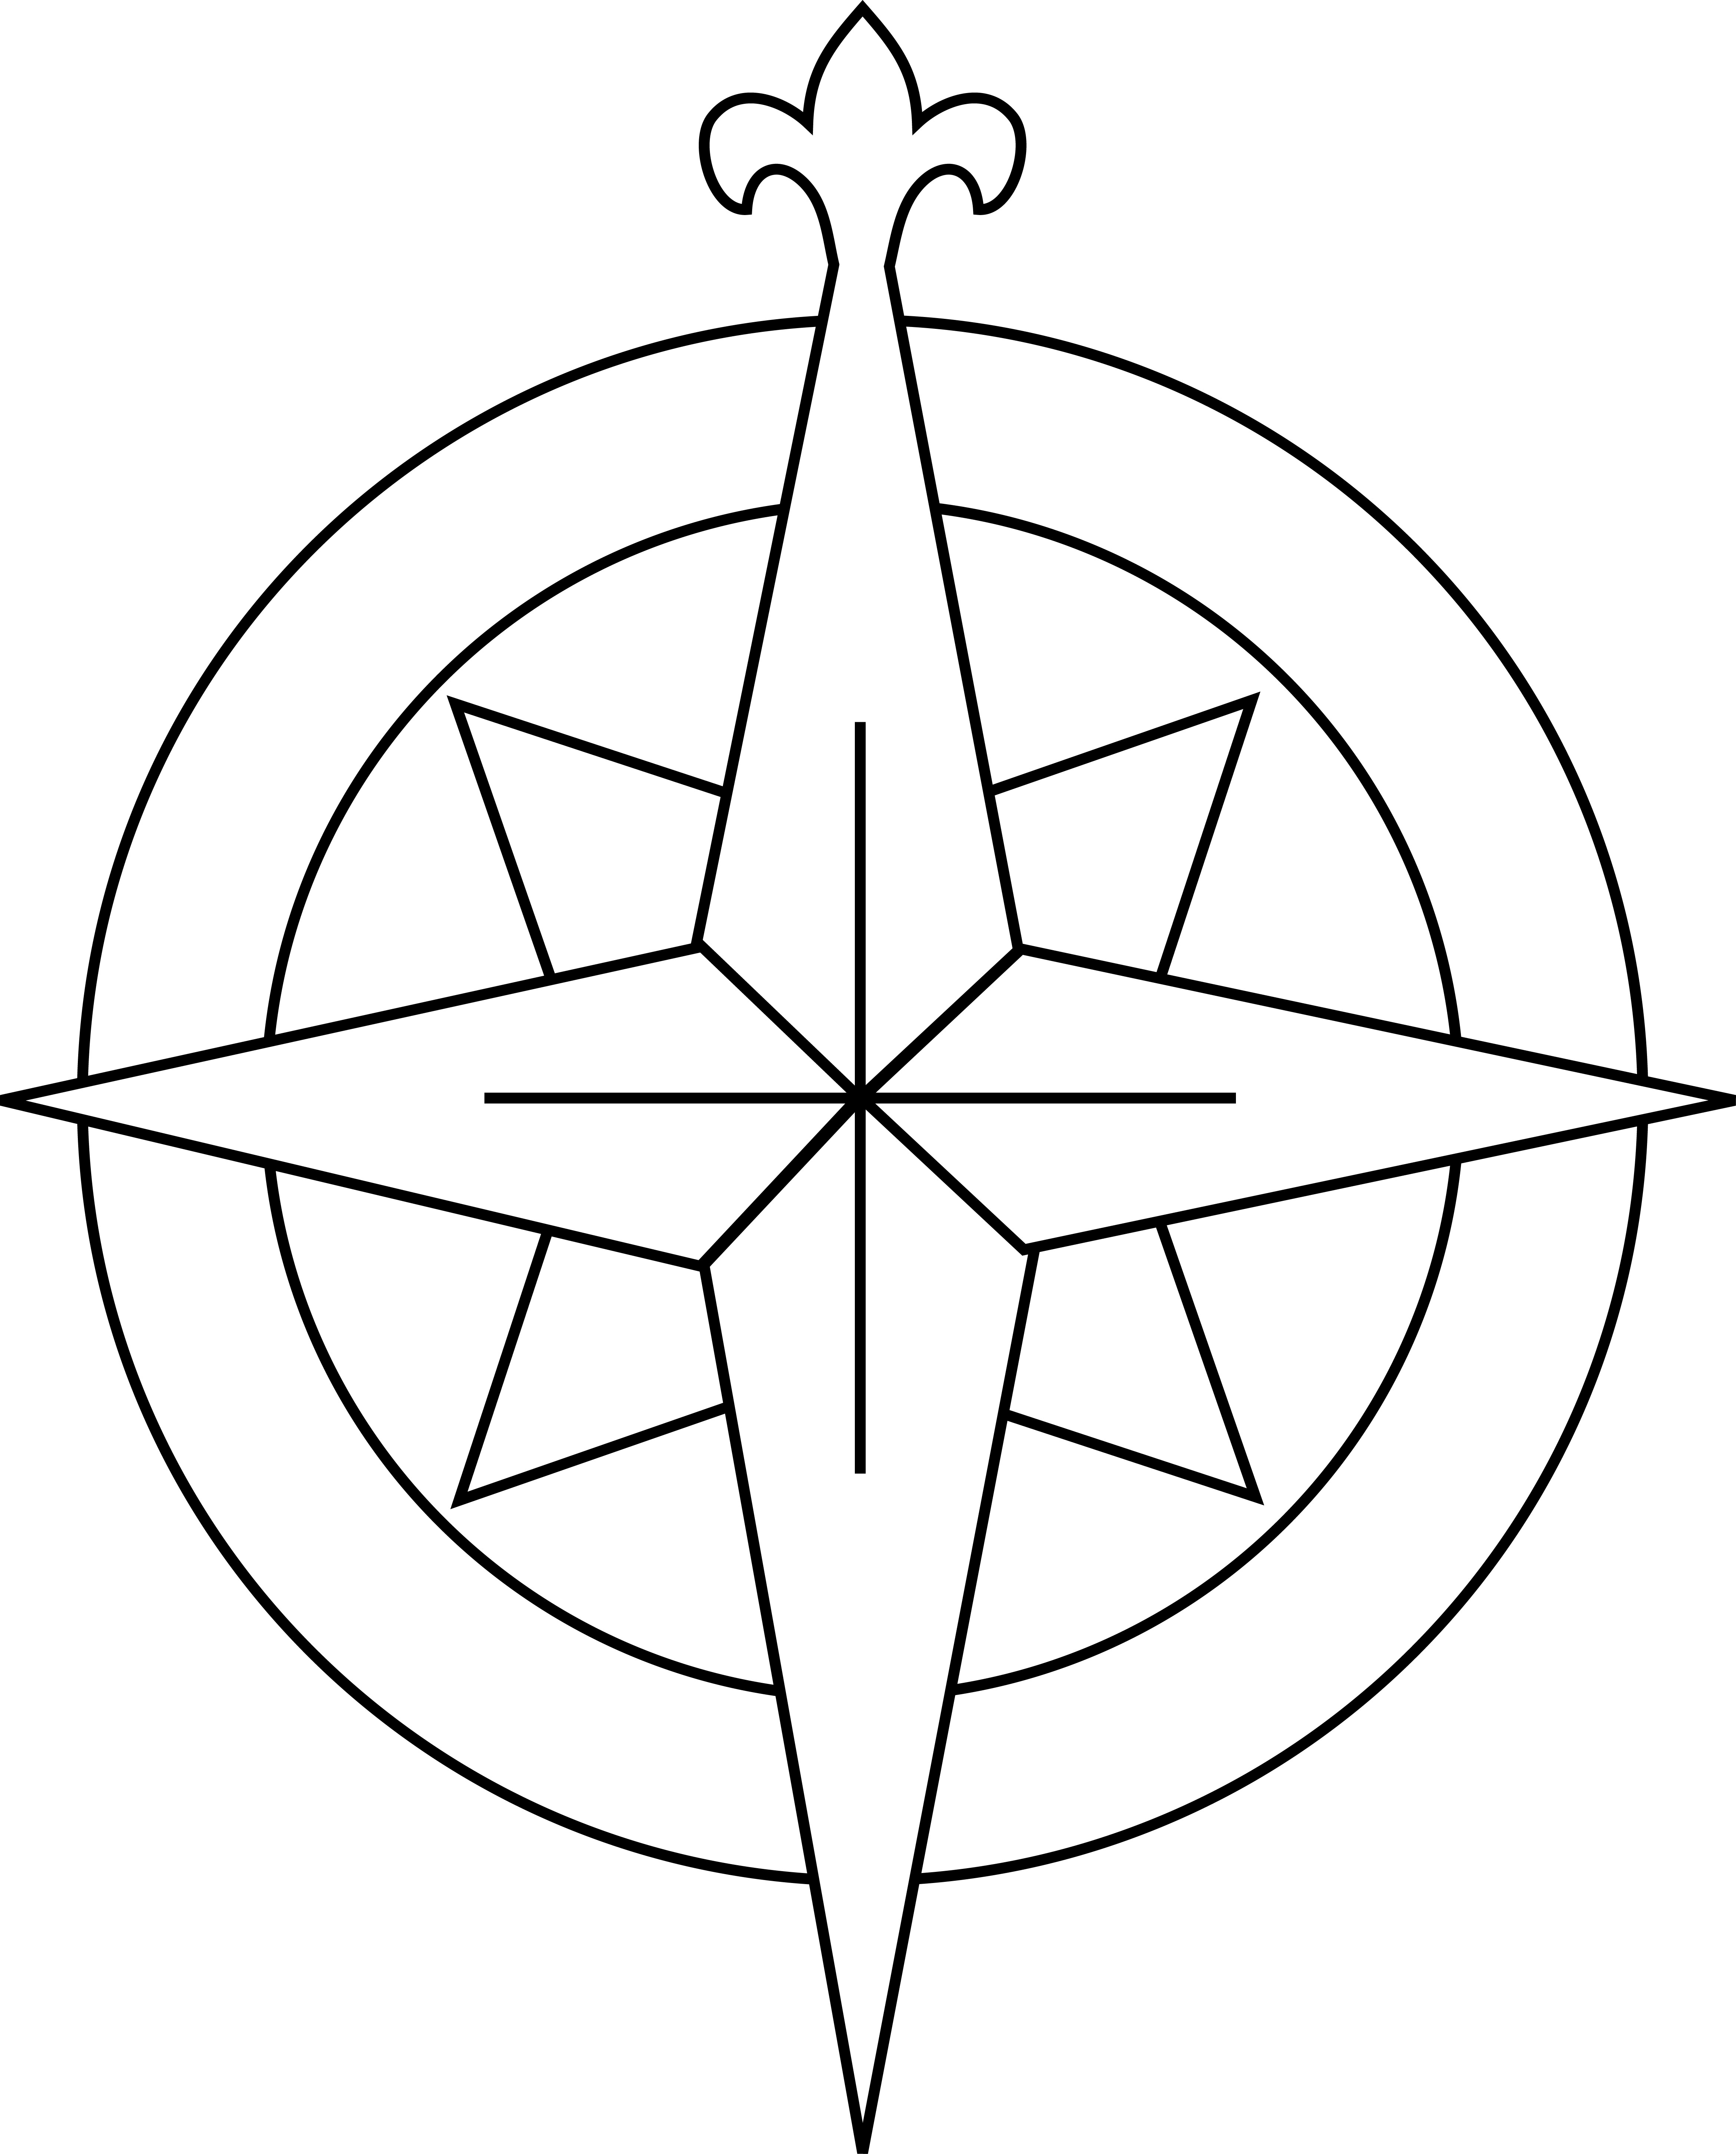 Image Compass Rose - Cliparts.co